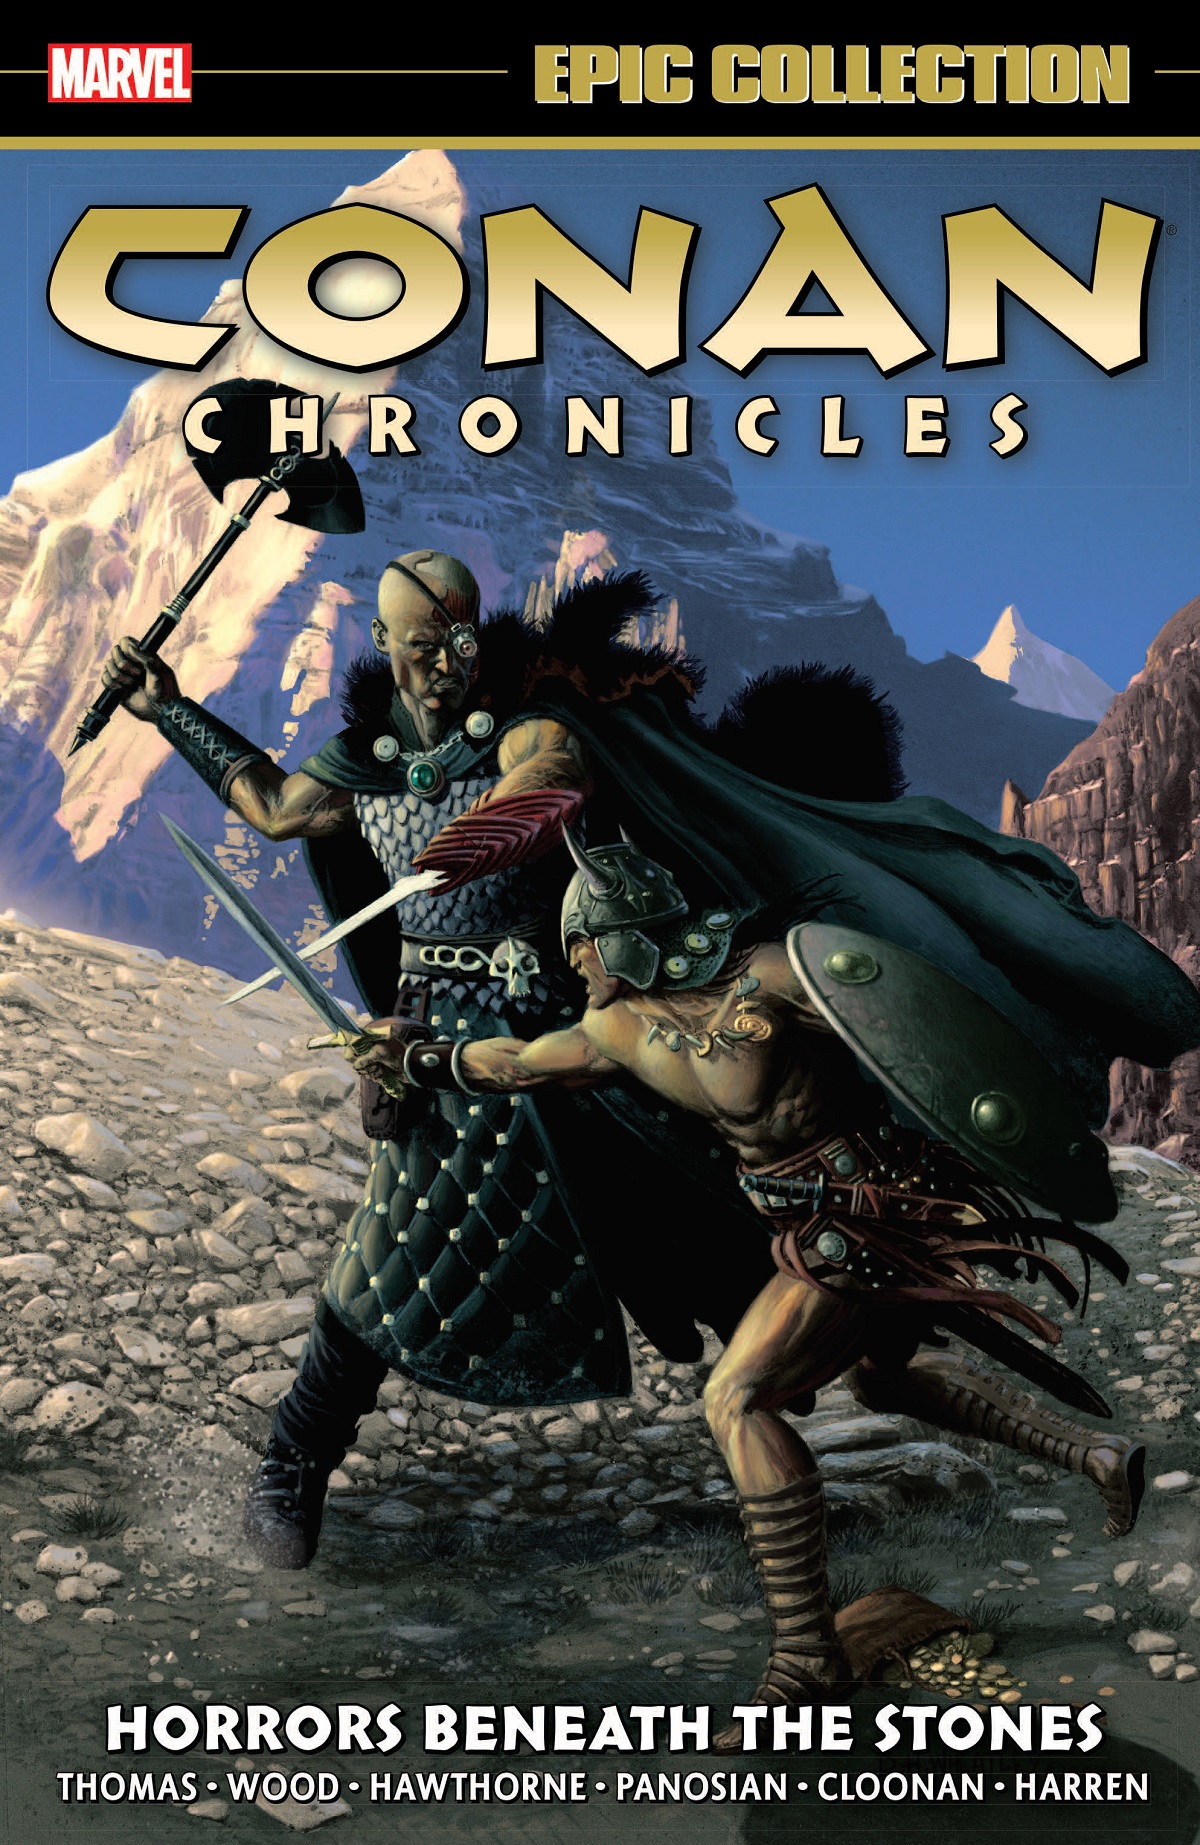 Conan Chronicles Epic Collection: Horrors Beneath The Stones (Trade Paperback)